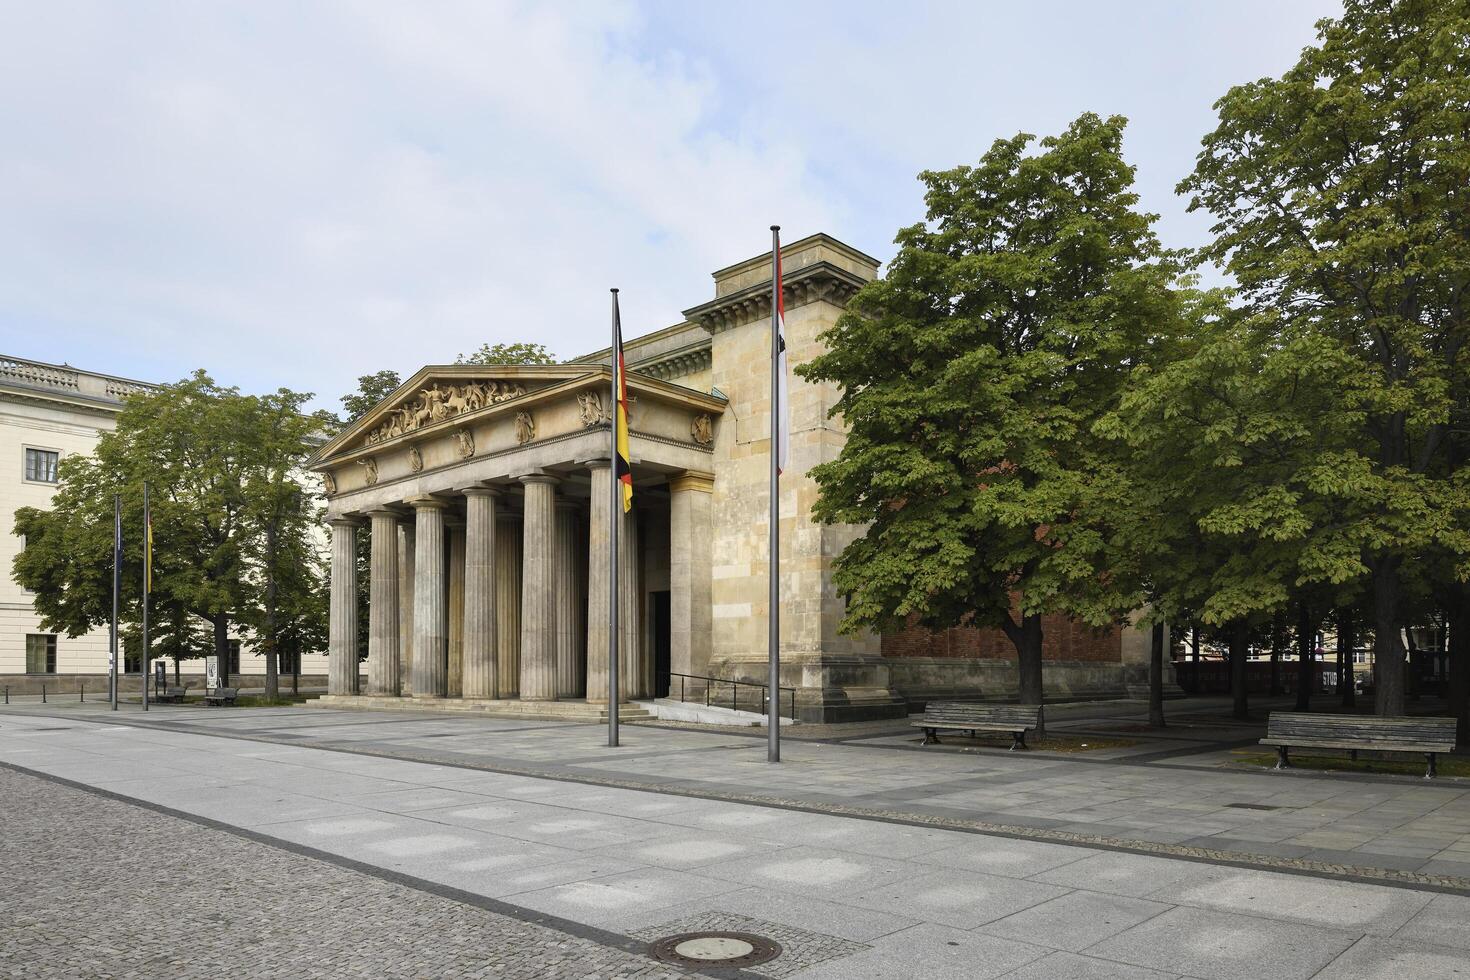 Berlin, Germany, 2021 - Central Memorial to the Victims of War and Tyranny, Neue Wache, Unter den Linden, Berlin, Germany photo